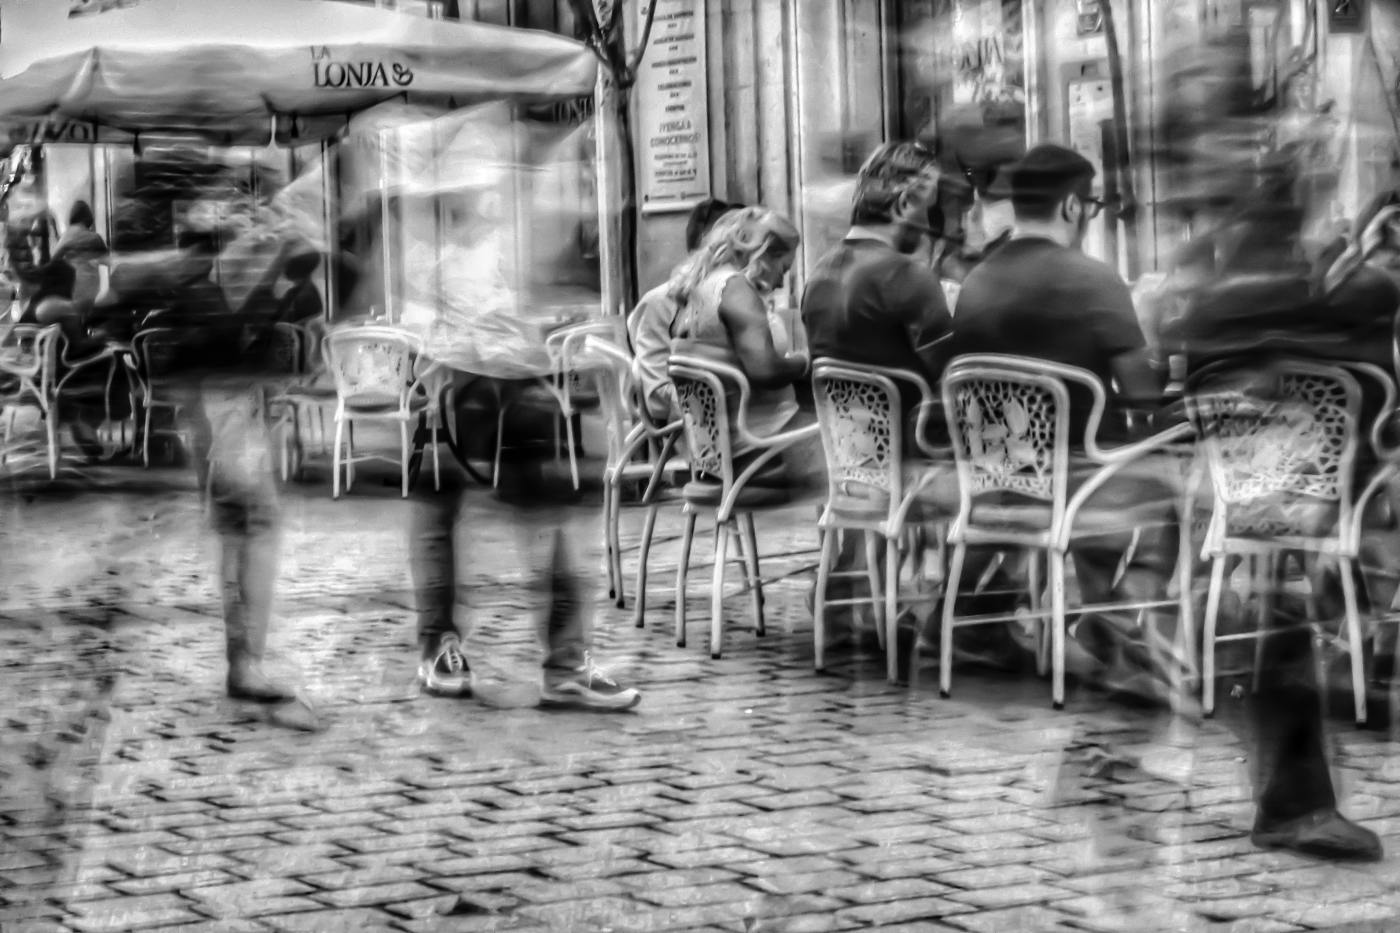 Blurred figures of people walking past outdoor cafe tables